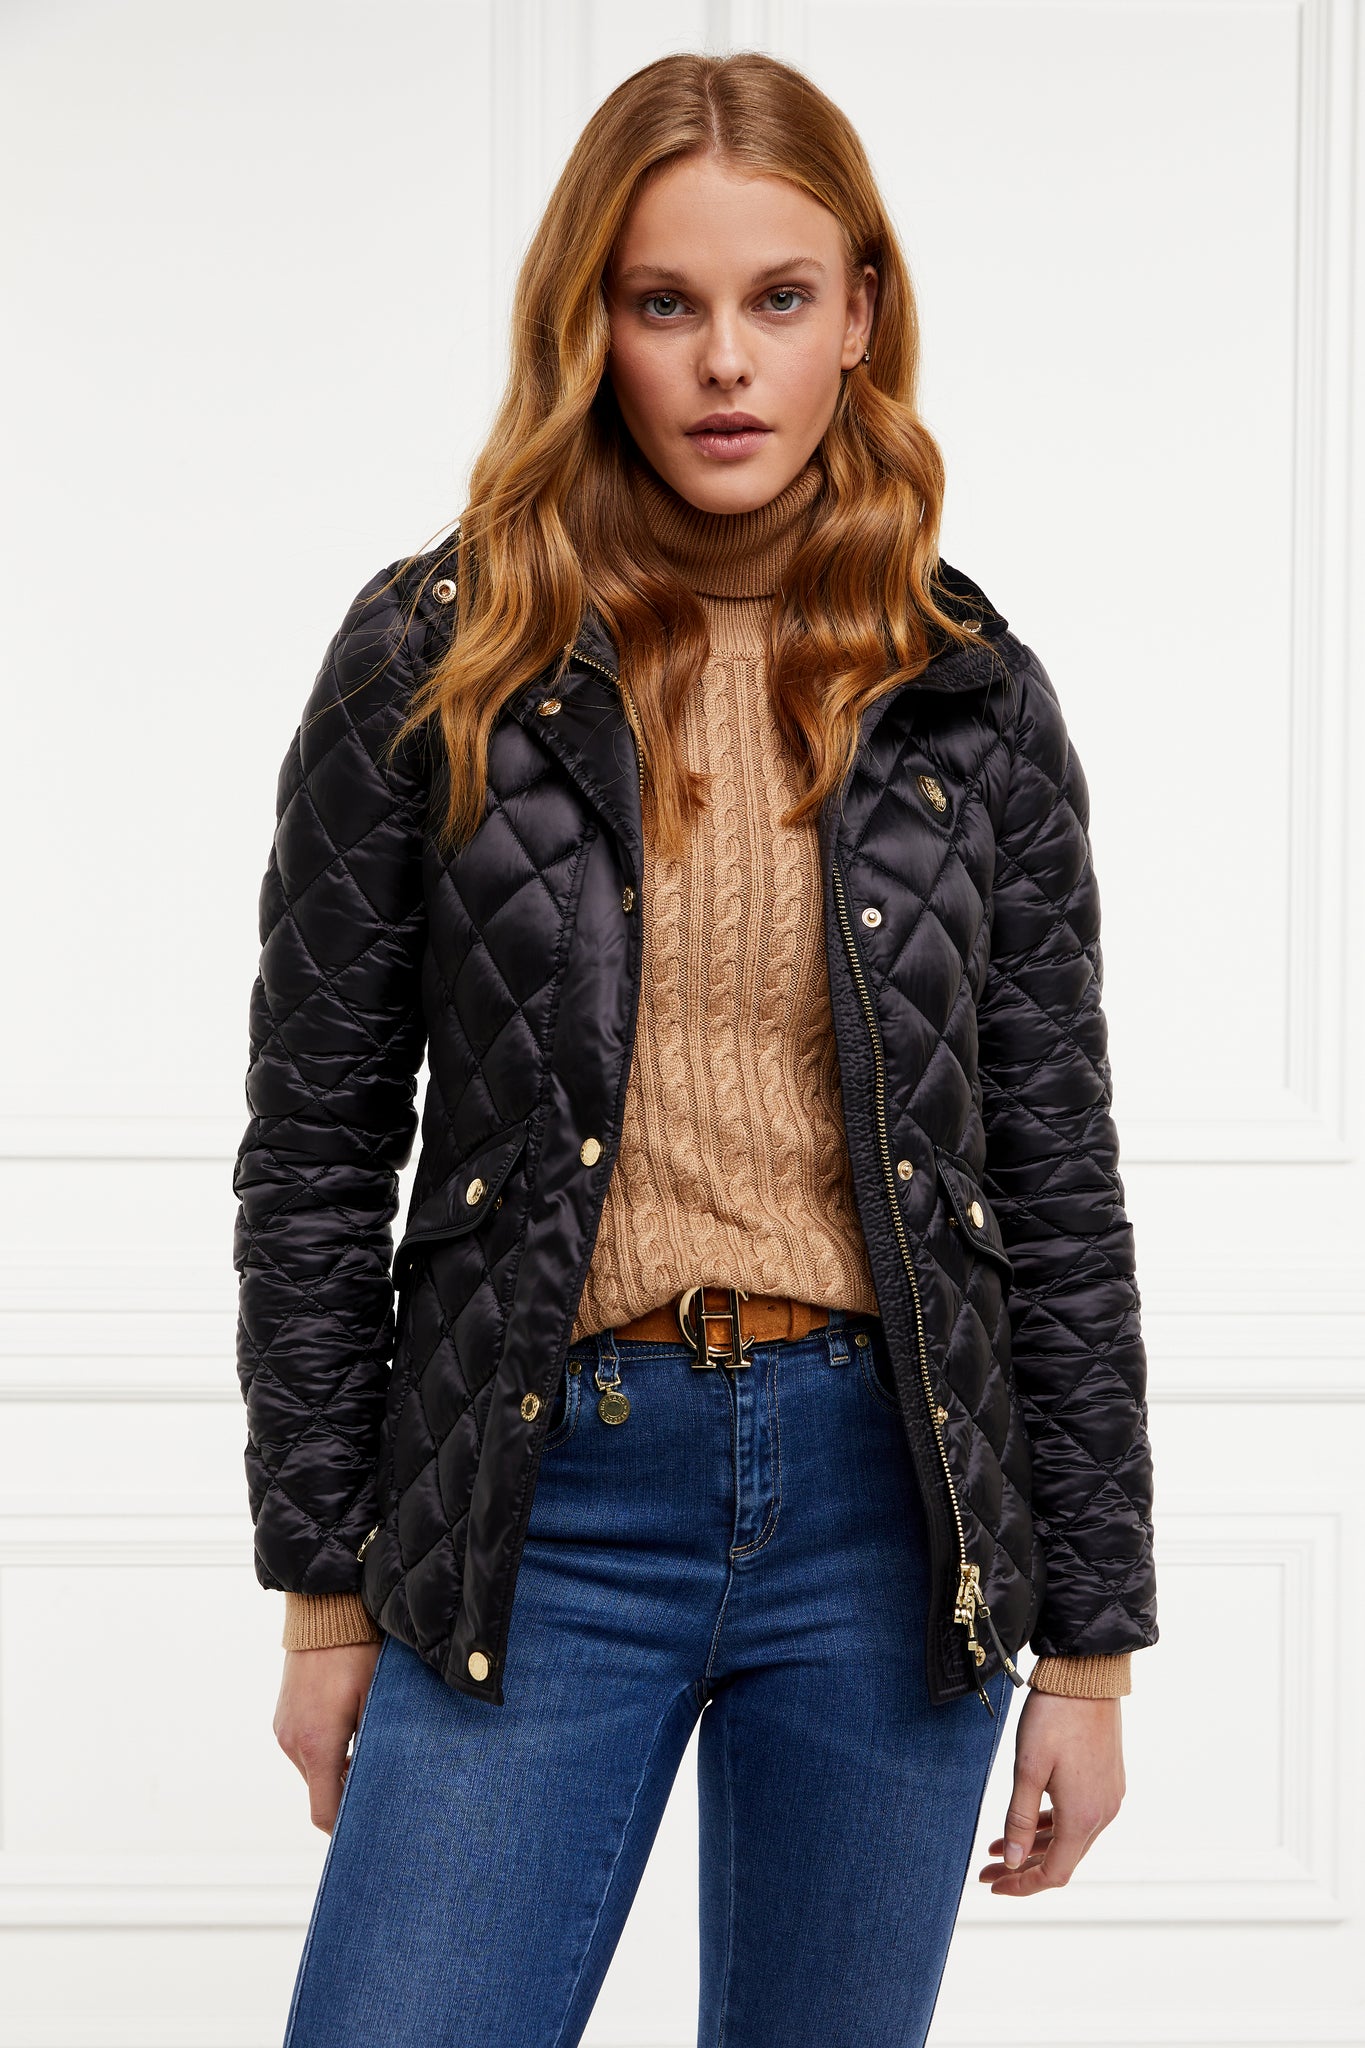 womens diamond quilted black jacket with contrast black leather elbow and shoulder pads large front pockets and shirred side panels